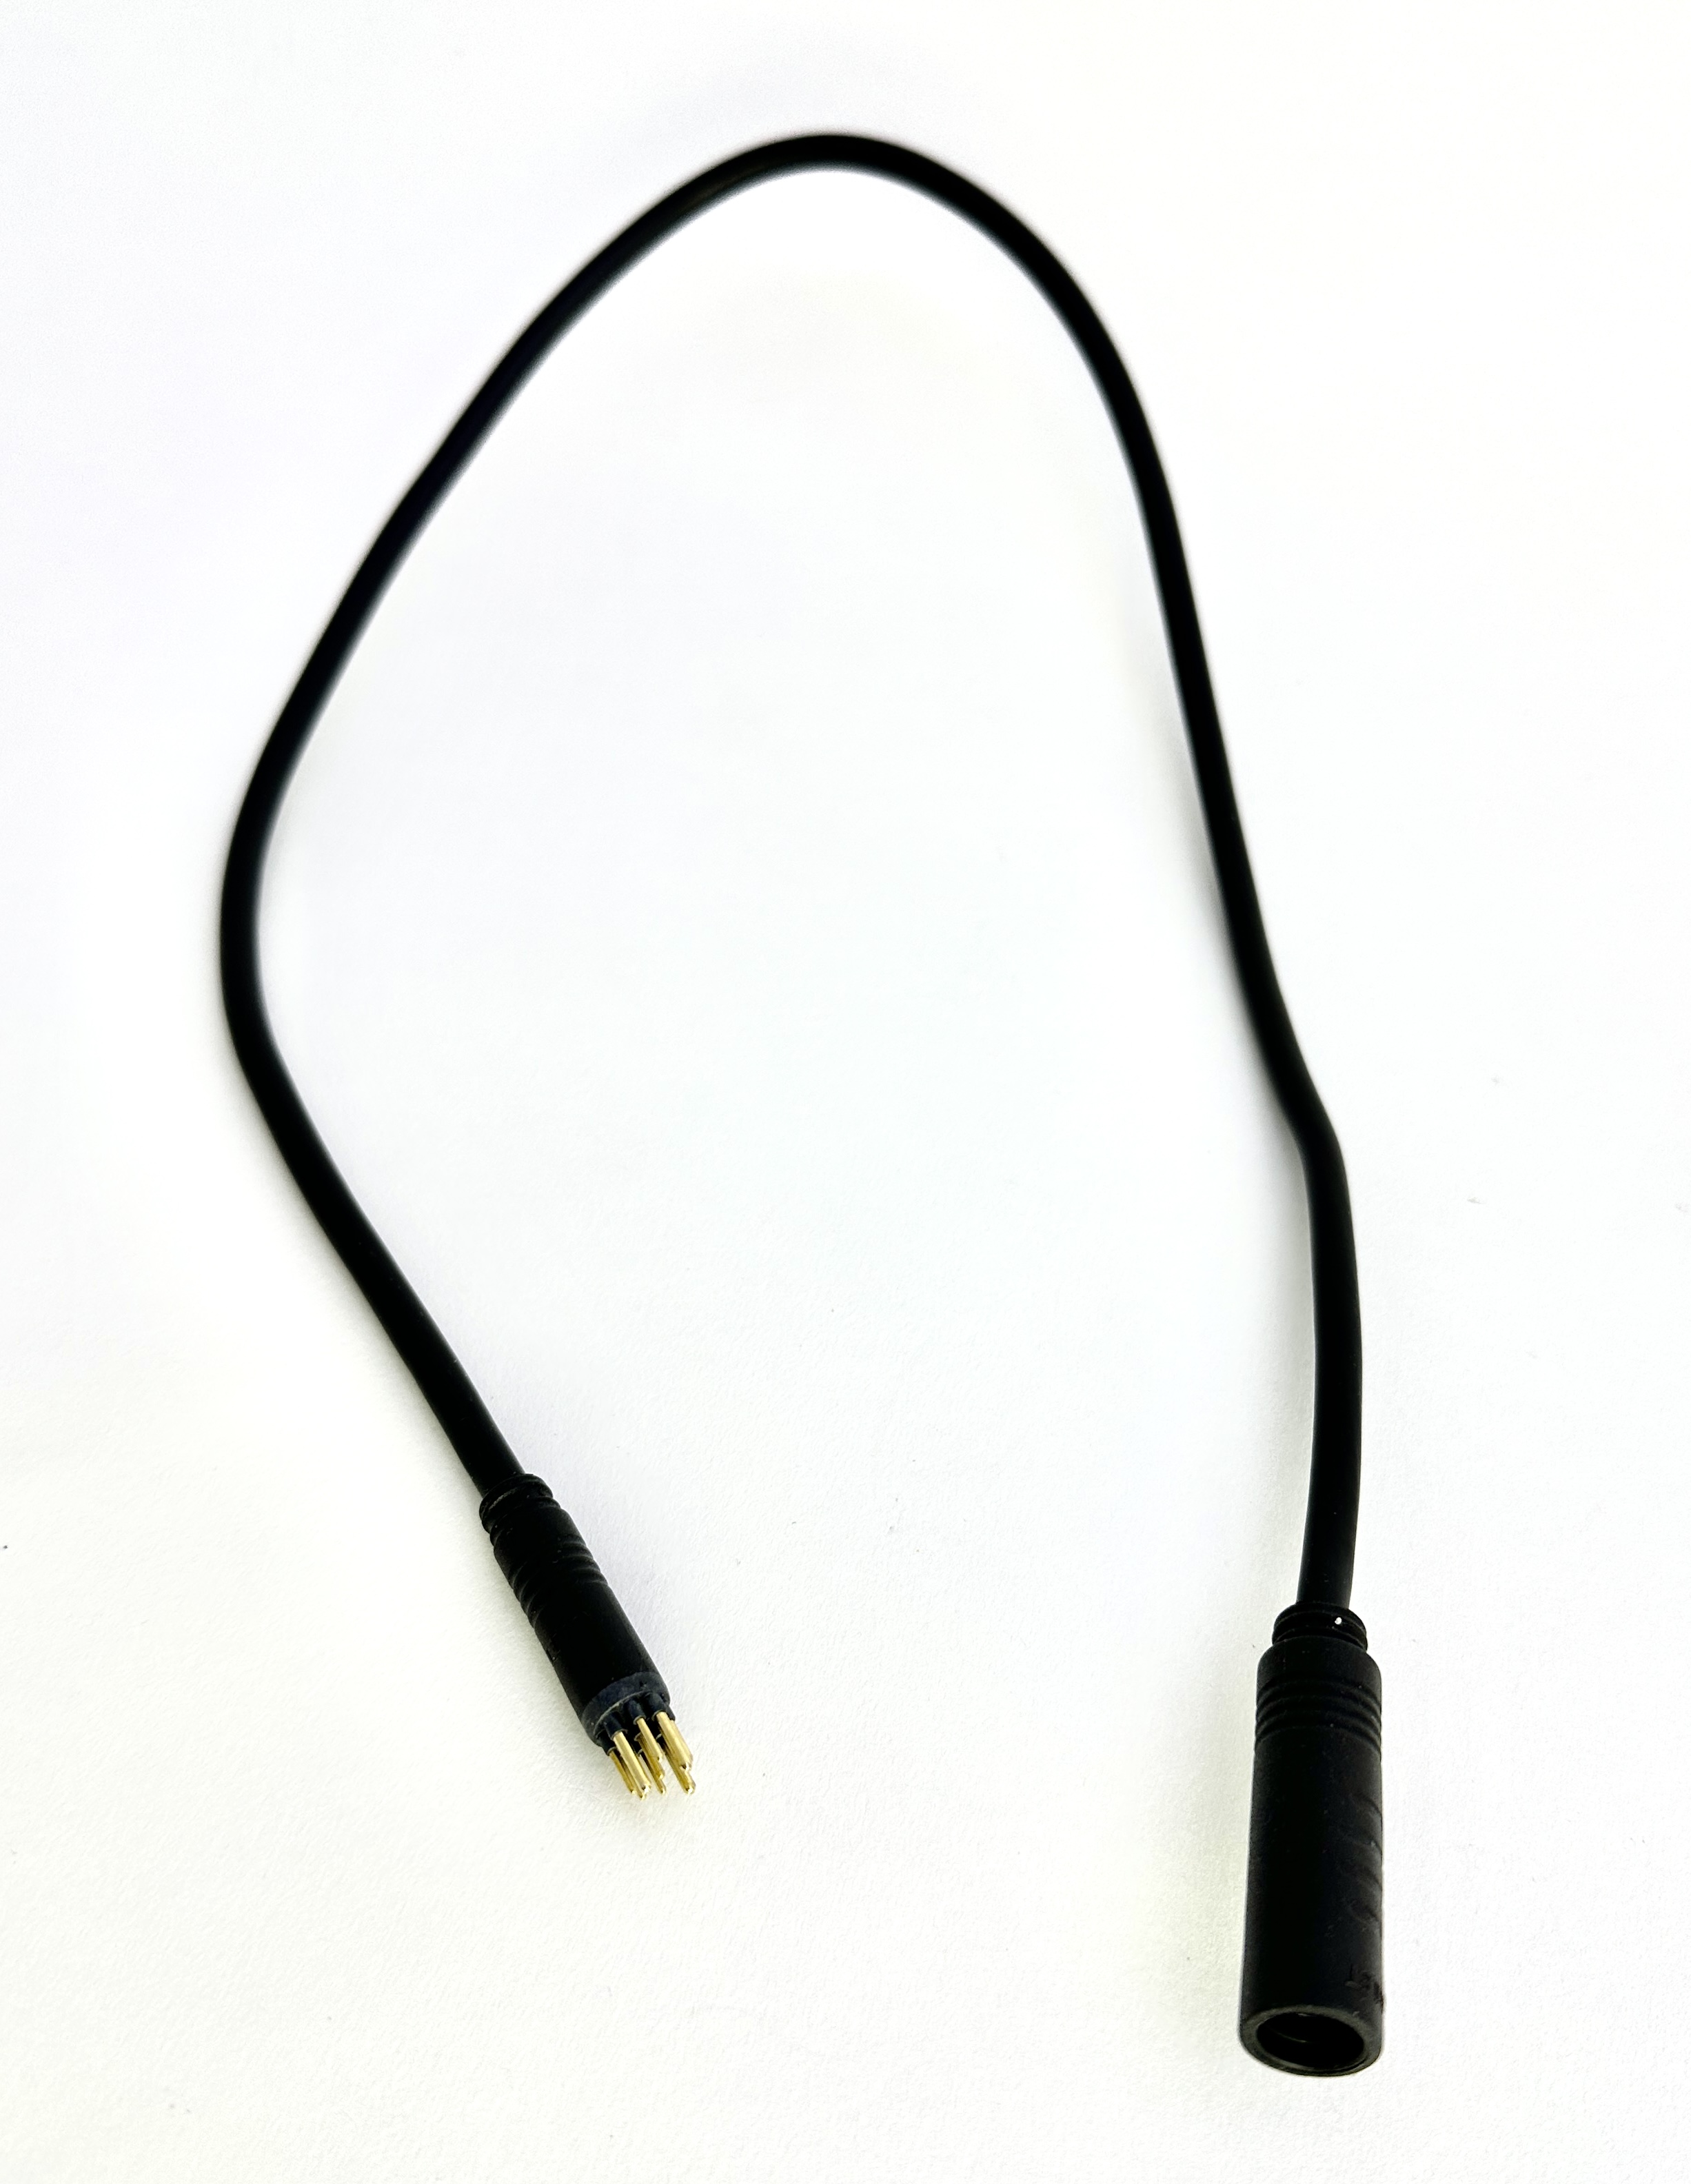 Motor extension cable Julet 9 PIN, 70 cm / 27,56 inches